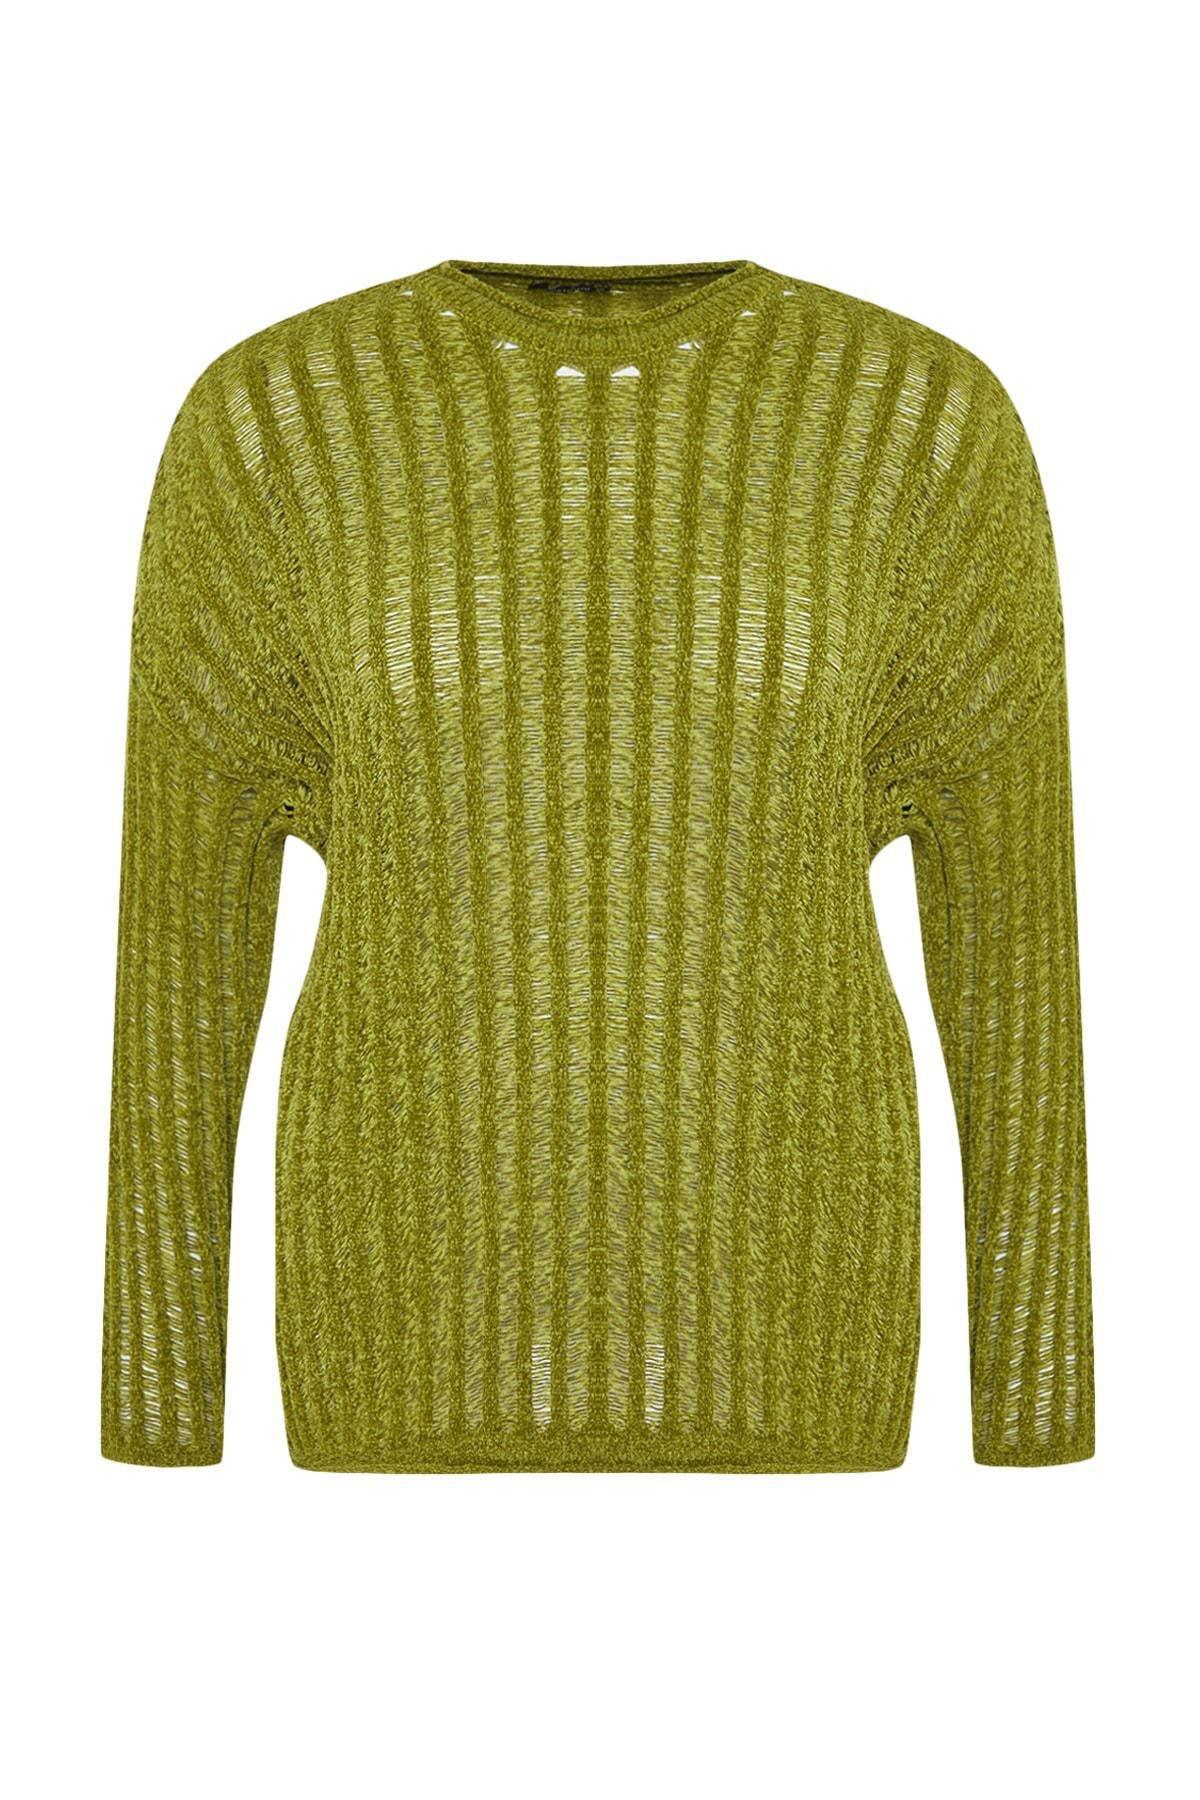 Trendyol - Green Perforated Knitted Sweater